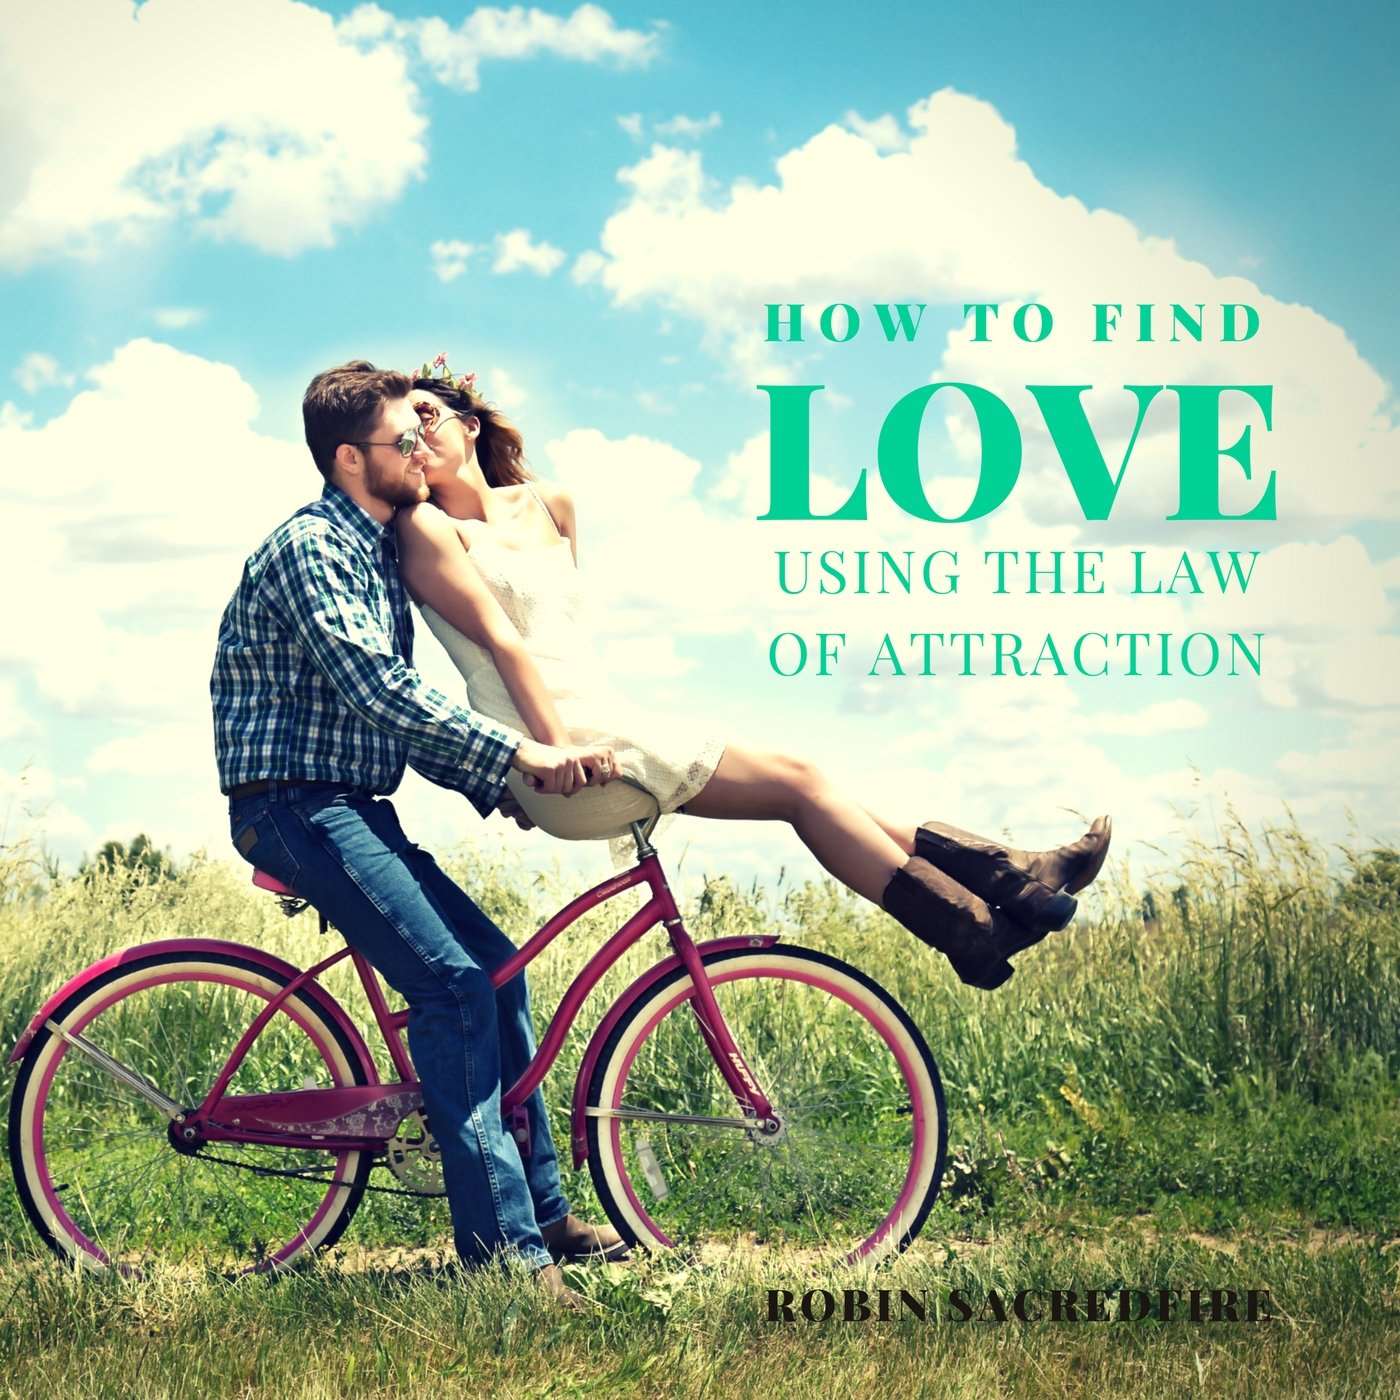 How to Find Love Using the Law of Attraction (Audiobook)